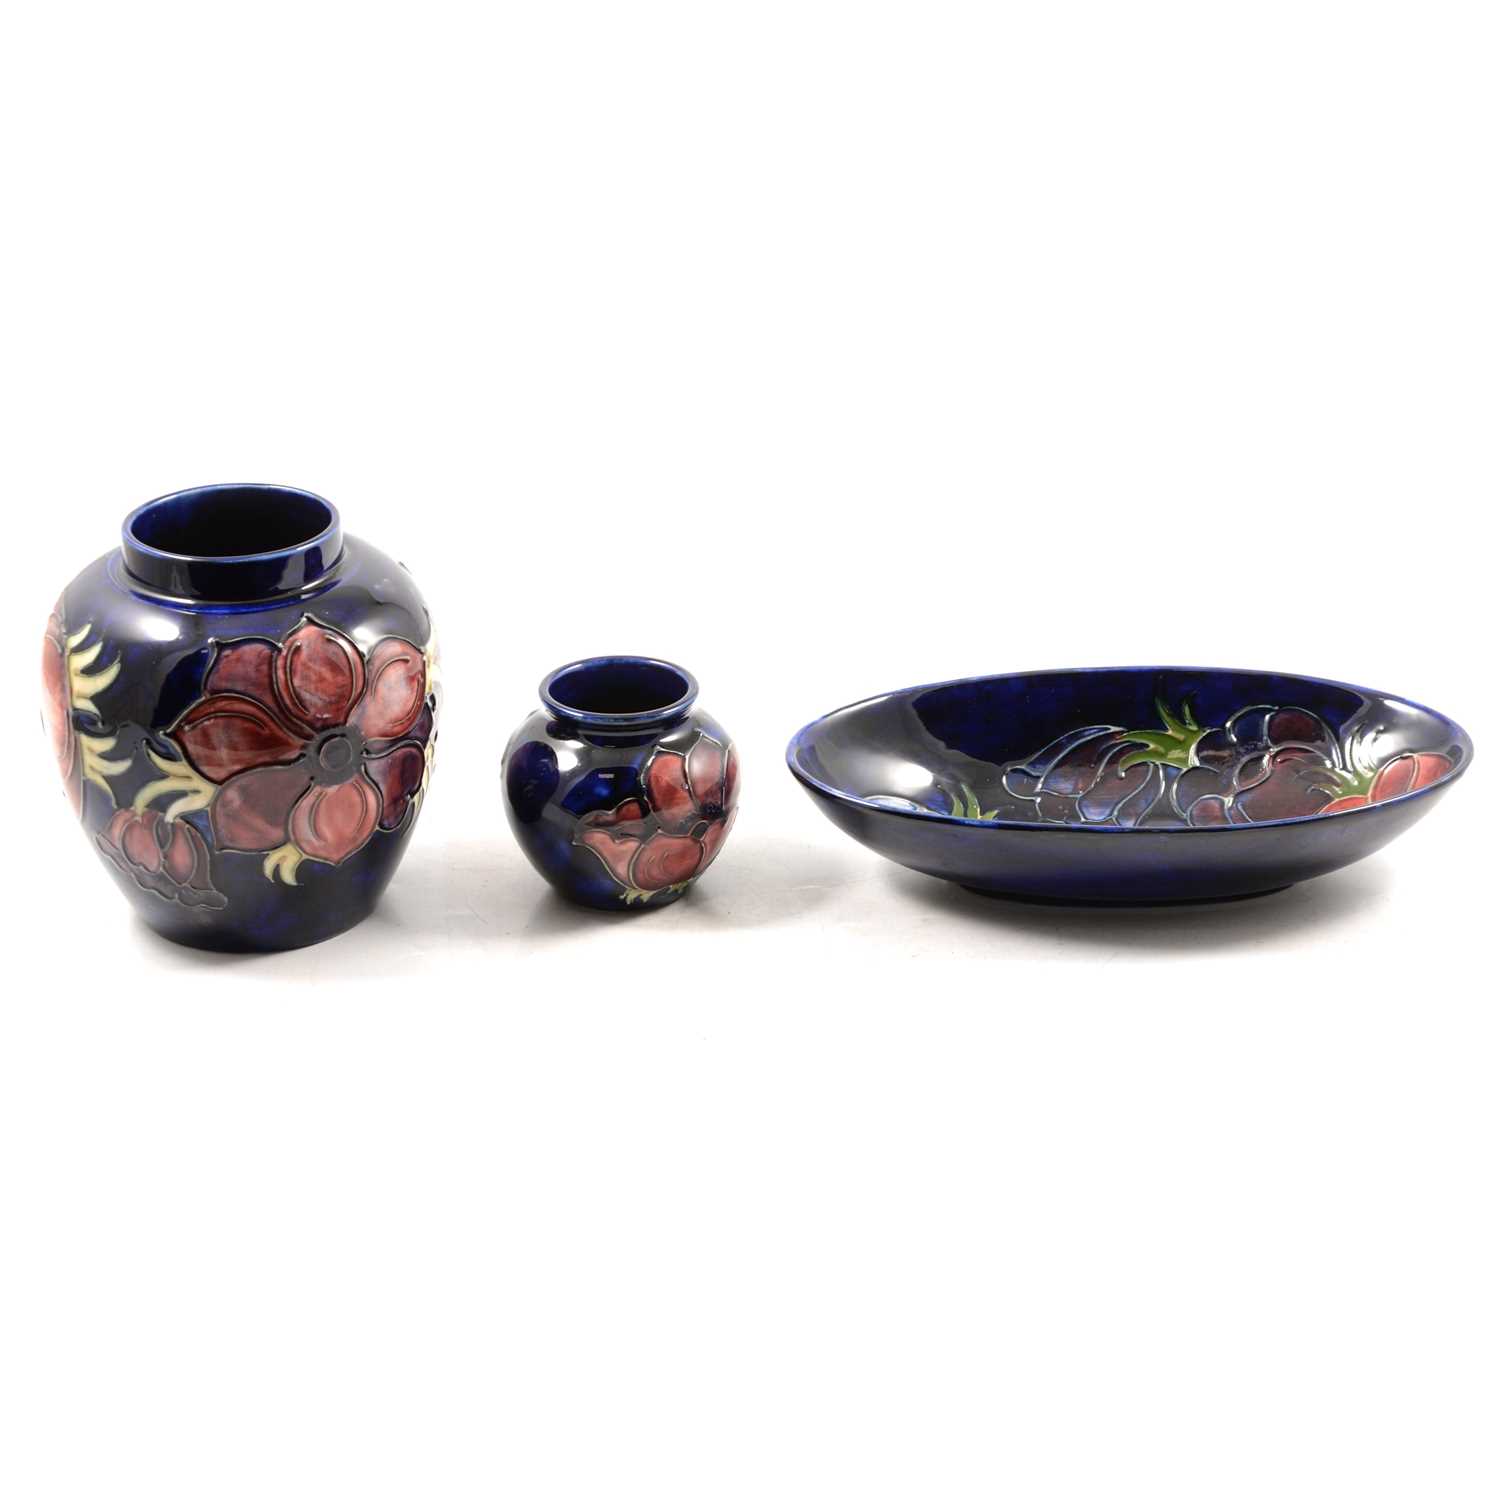 Lot 8 - Moorcroft Pottery - Anemone pattern ginger jar, small vase and dish.